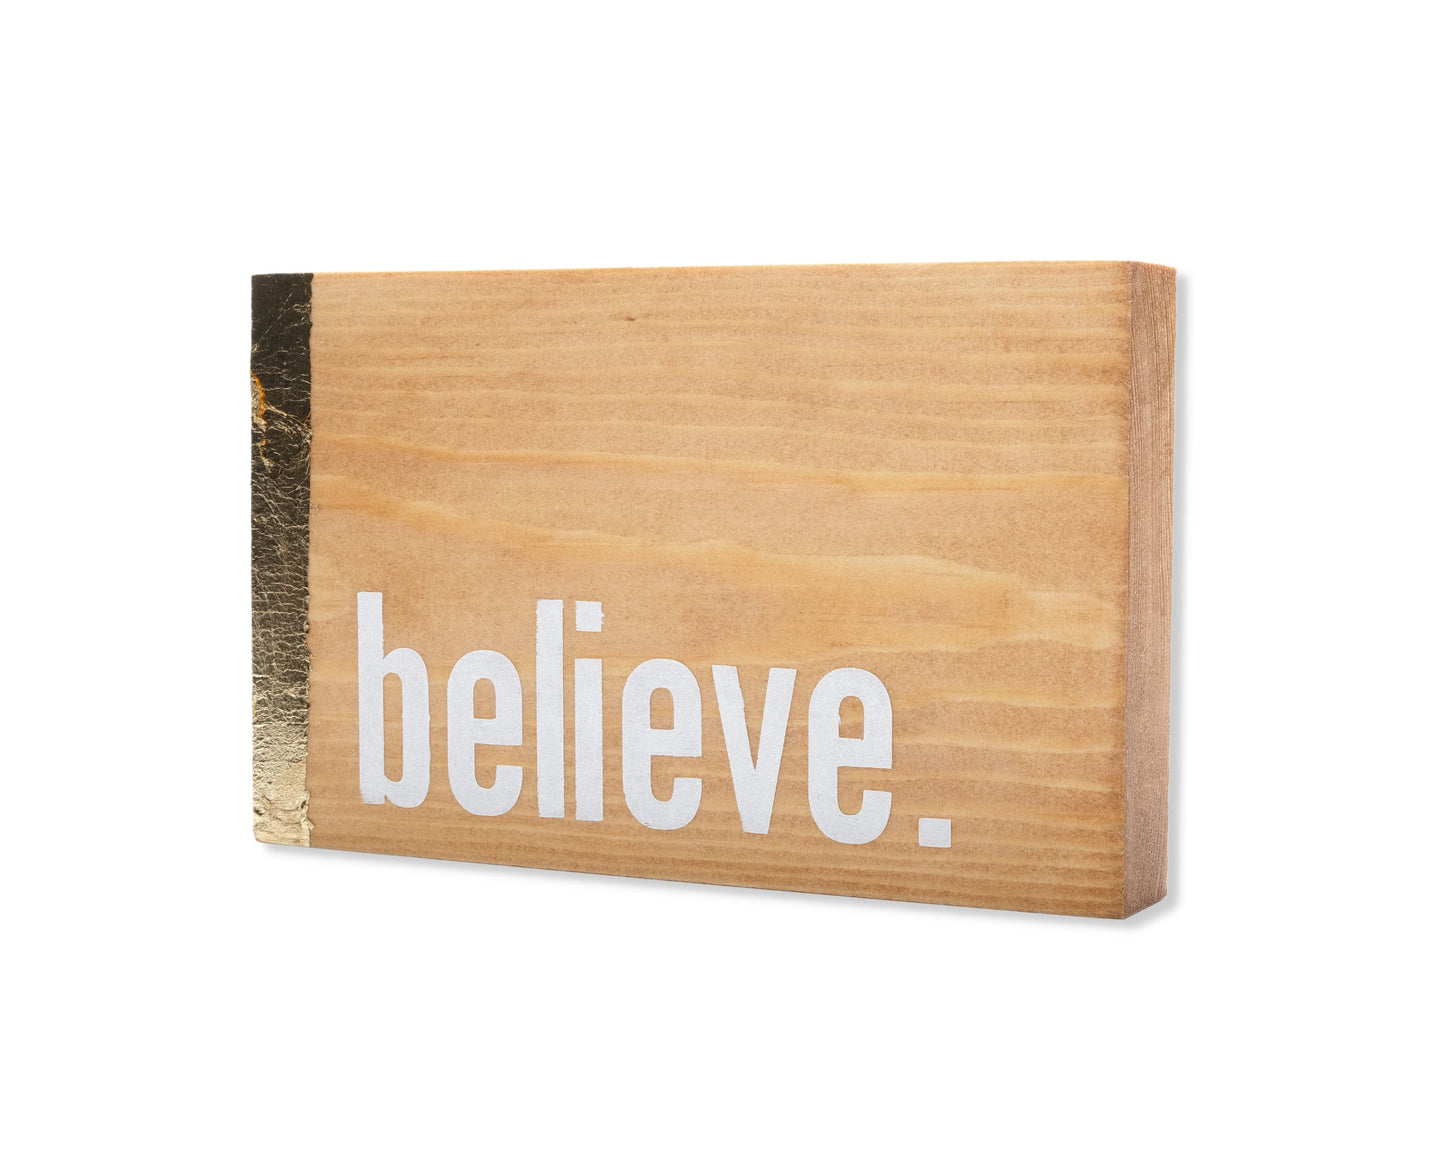 Small freestanding rectangular wooden sign displayed at 35 degree angle to show depth of sign. Natural wood color, with gold vertical border on left side only. White painted message in chunky font and full stop, believe. Studio style photo.